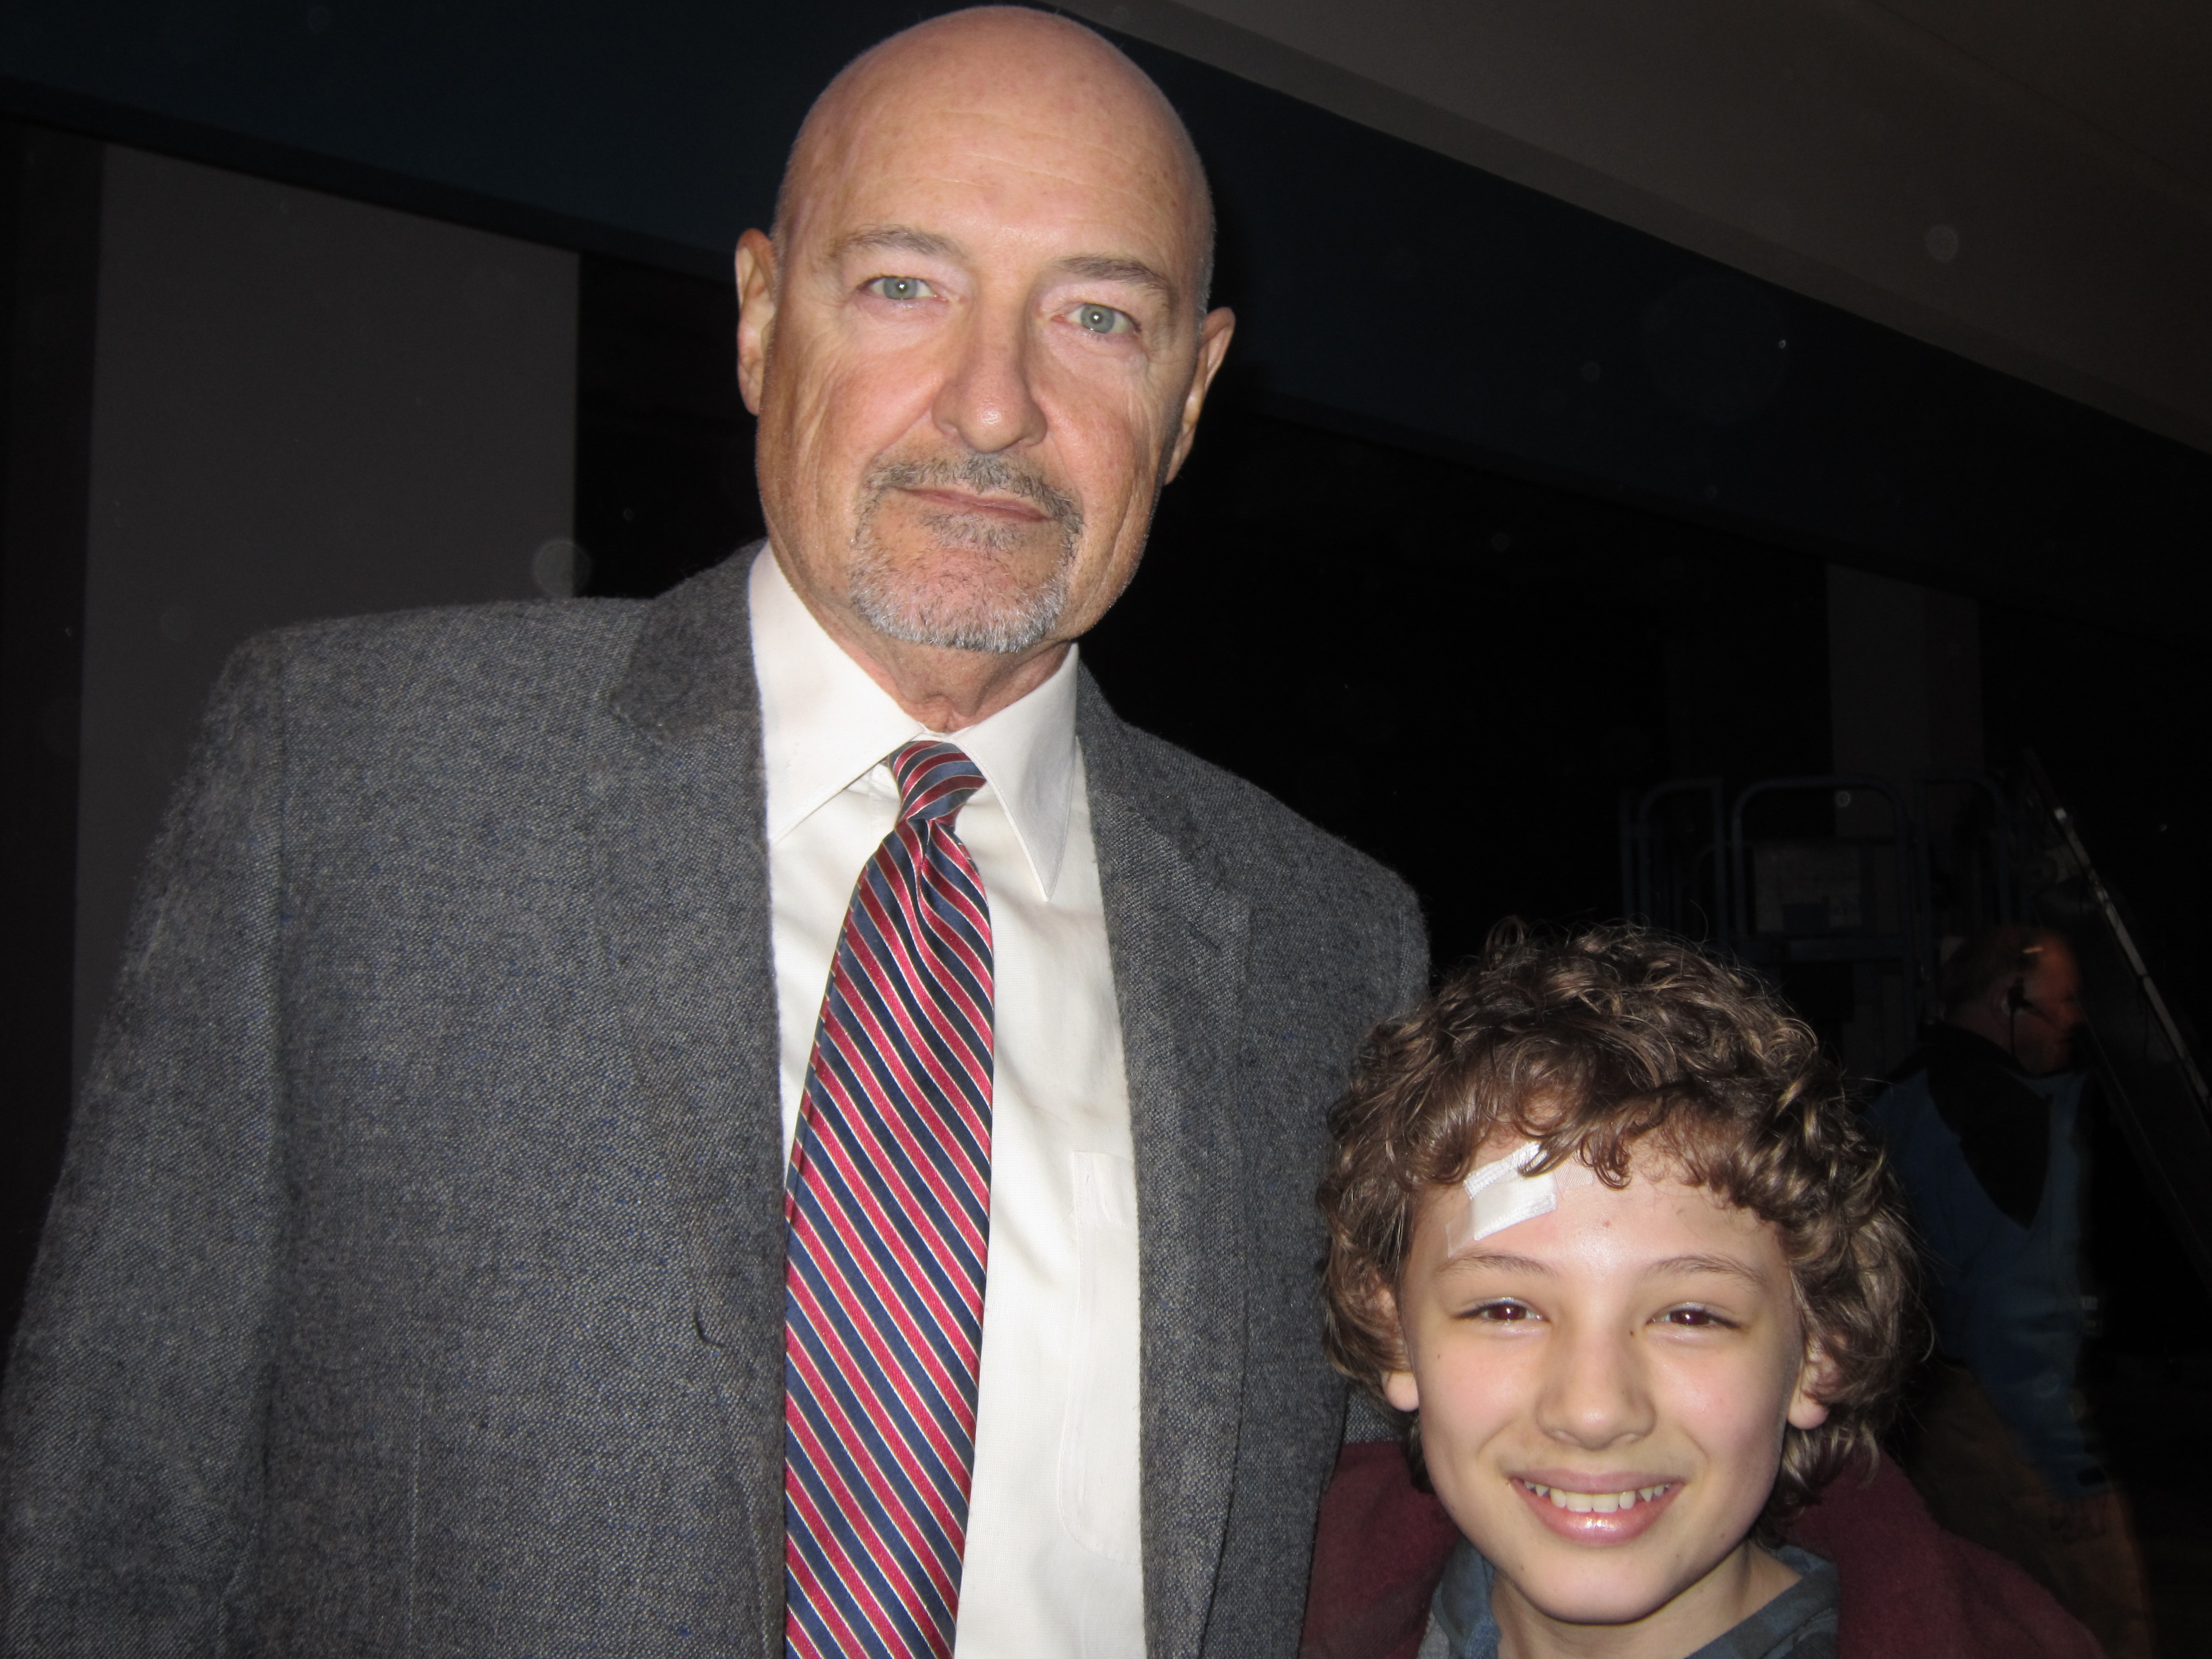 Maxim and Terry O'Quinn on the 